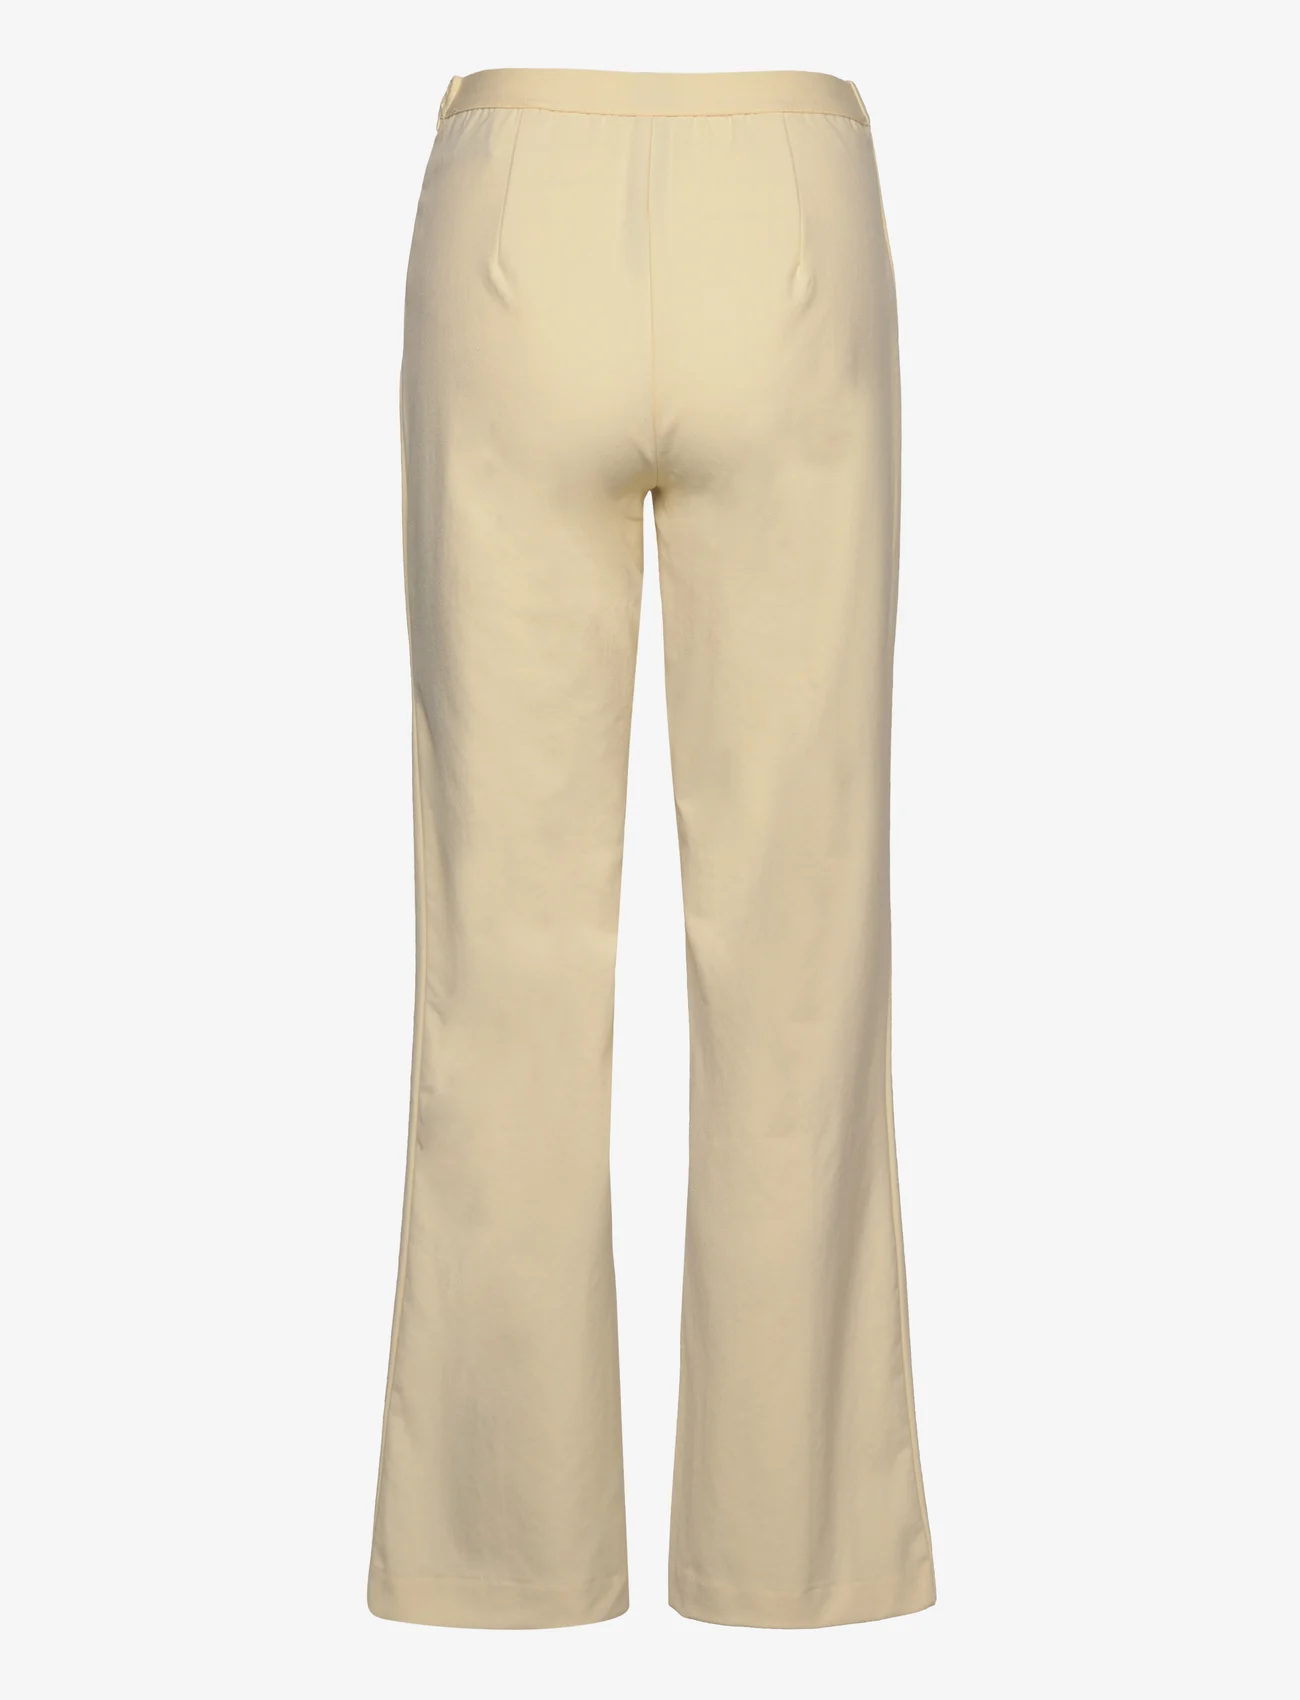 Mads Nørgaard - Recycled Sportina Pirla Pants FAV - naised - double cream - 1